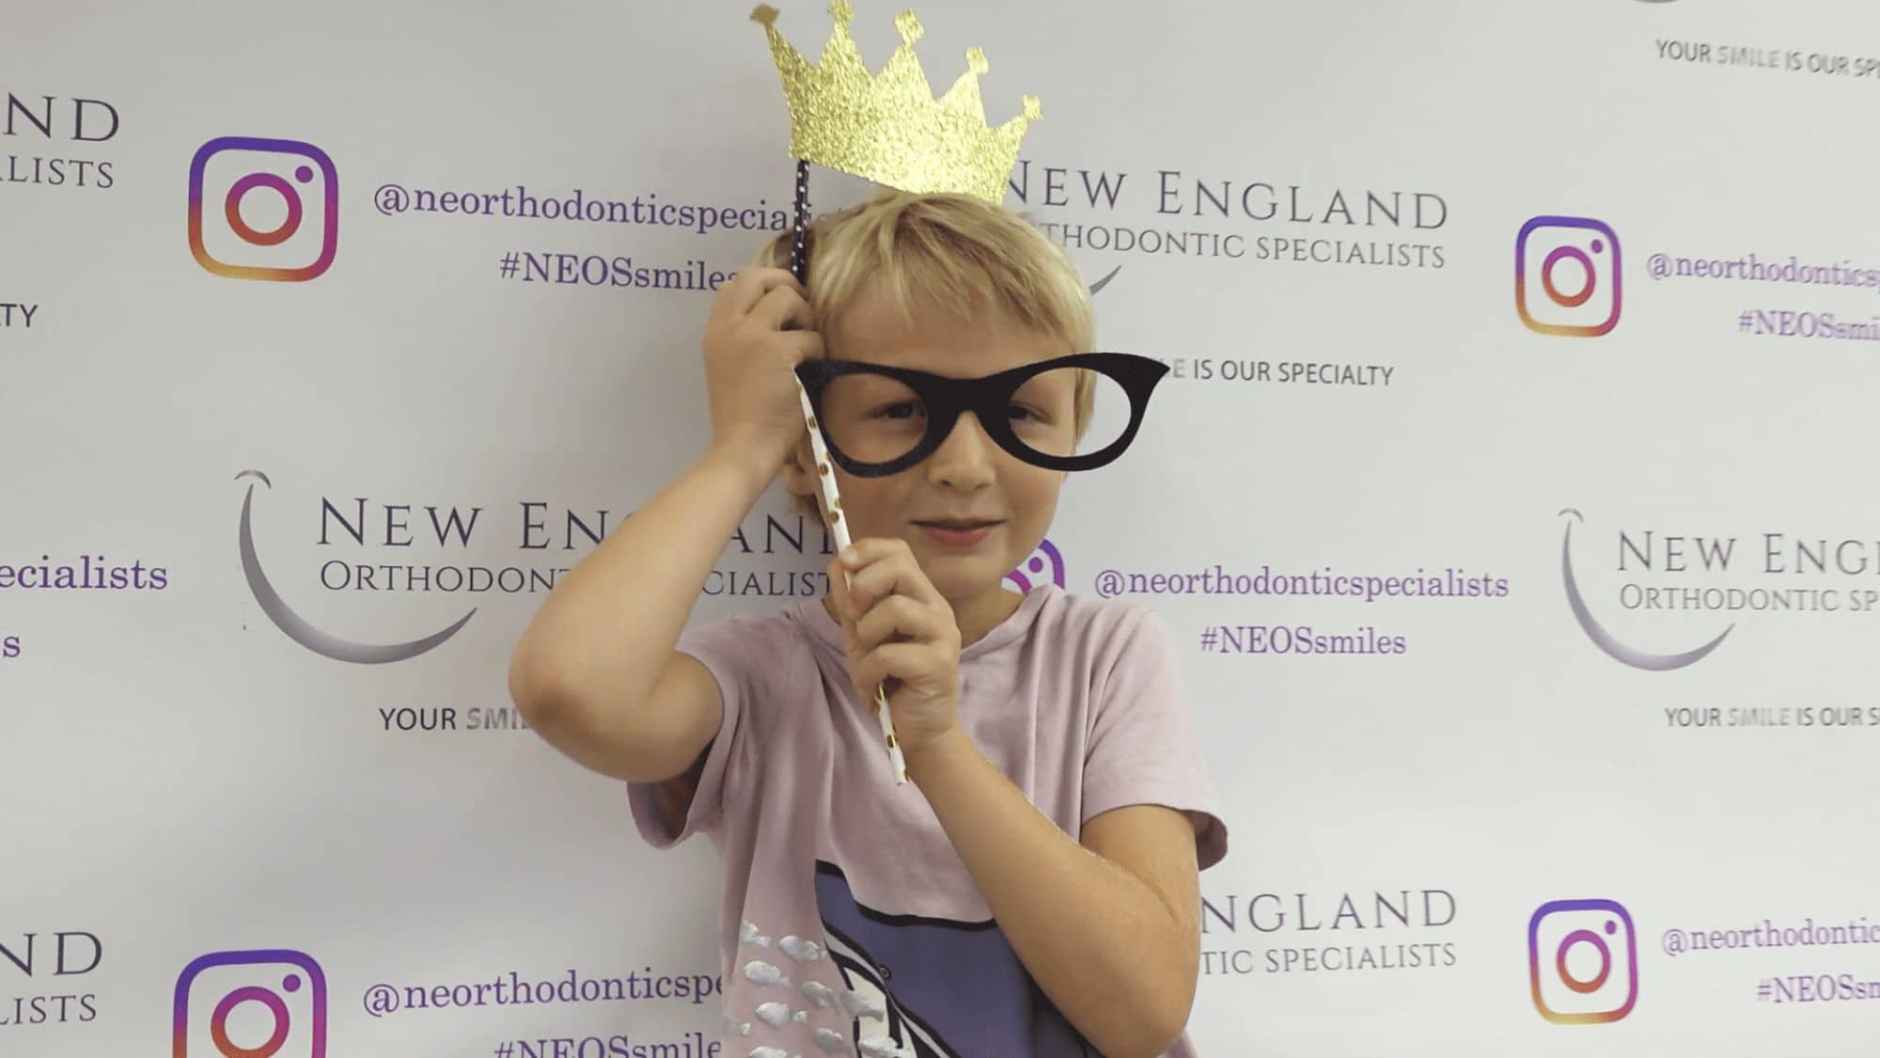 A young boy wearing glasses and a crown stands proudly in front of the New England Orthodontics sign